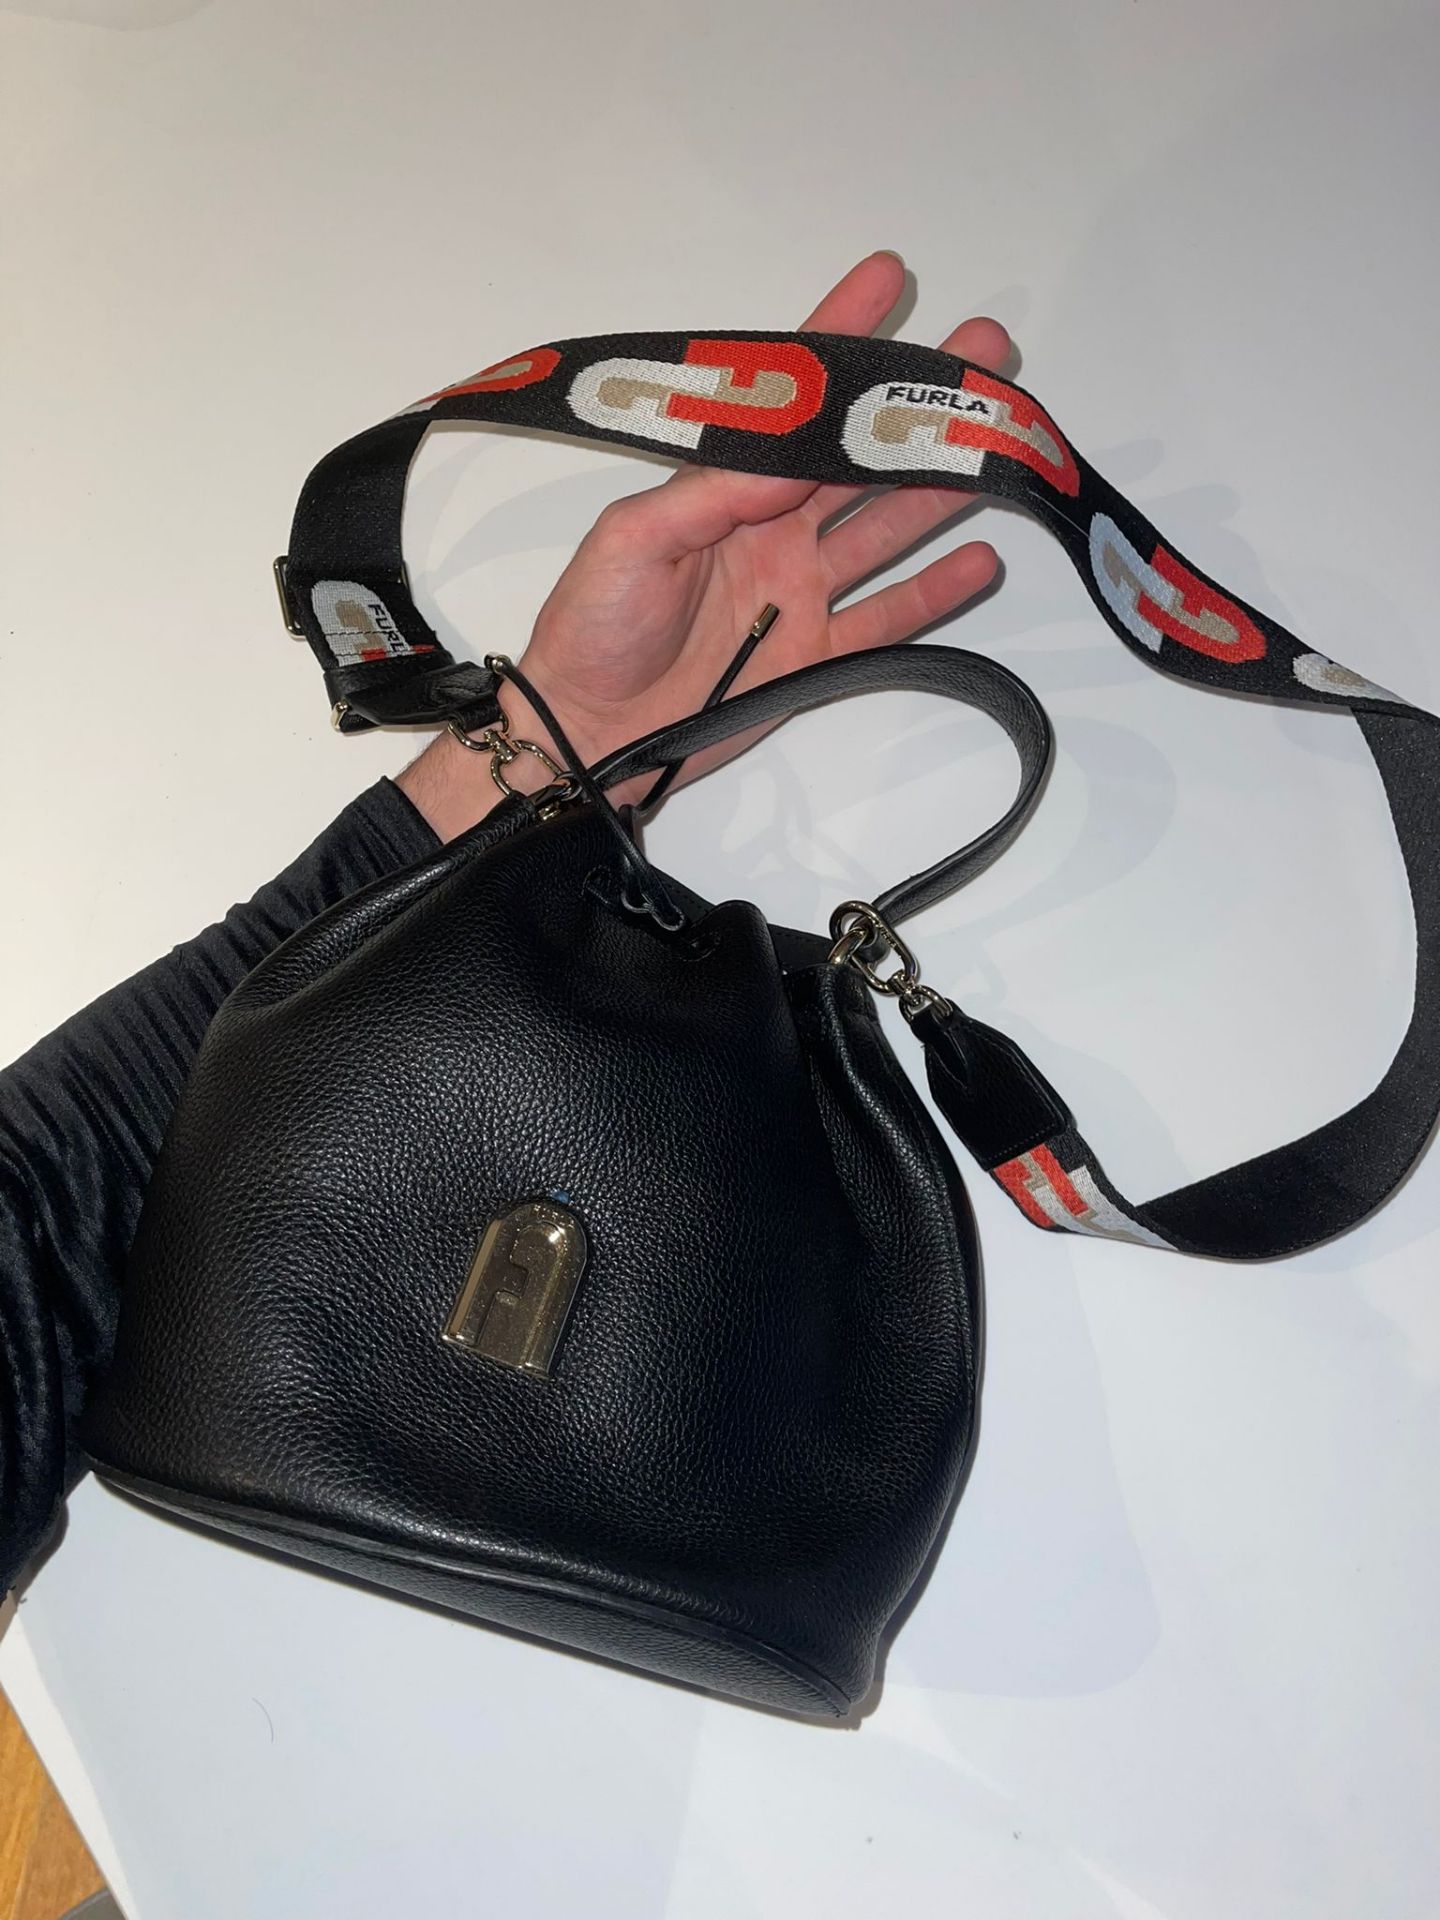 Furla Belle Black Shoulder Bag. RRP £550.00. Furla Design on the strap which stands out from the - Image 3 of 3